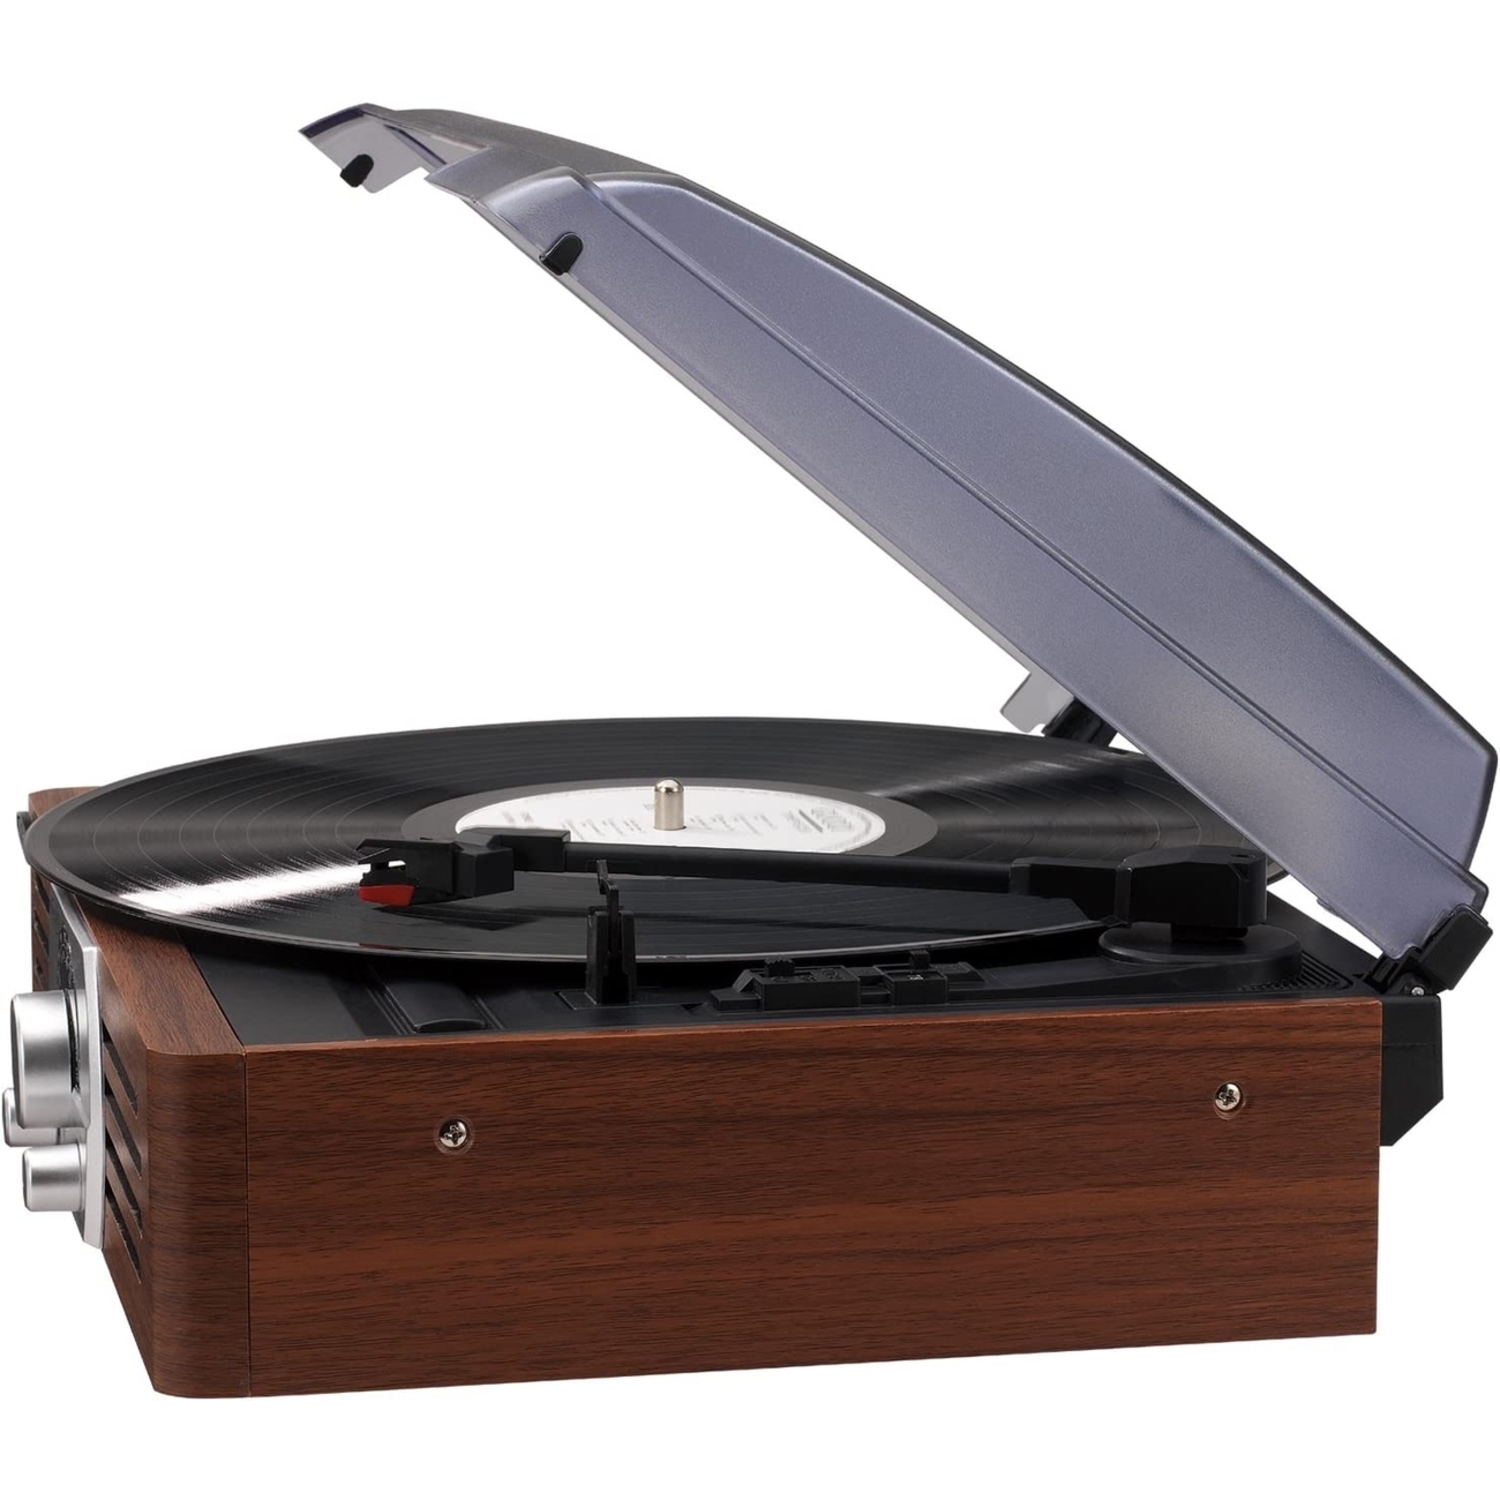 JENSEN JTA-222P Turntable with AM/FM And Pitch Control - image 3 of 6